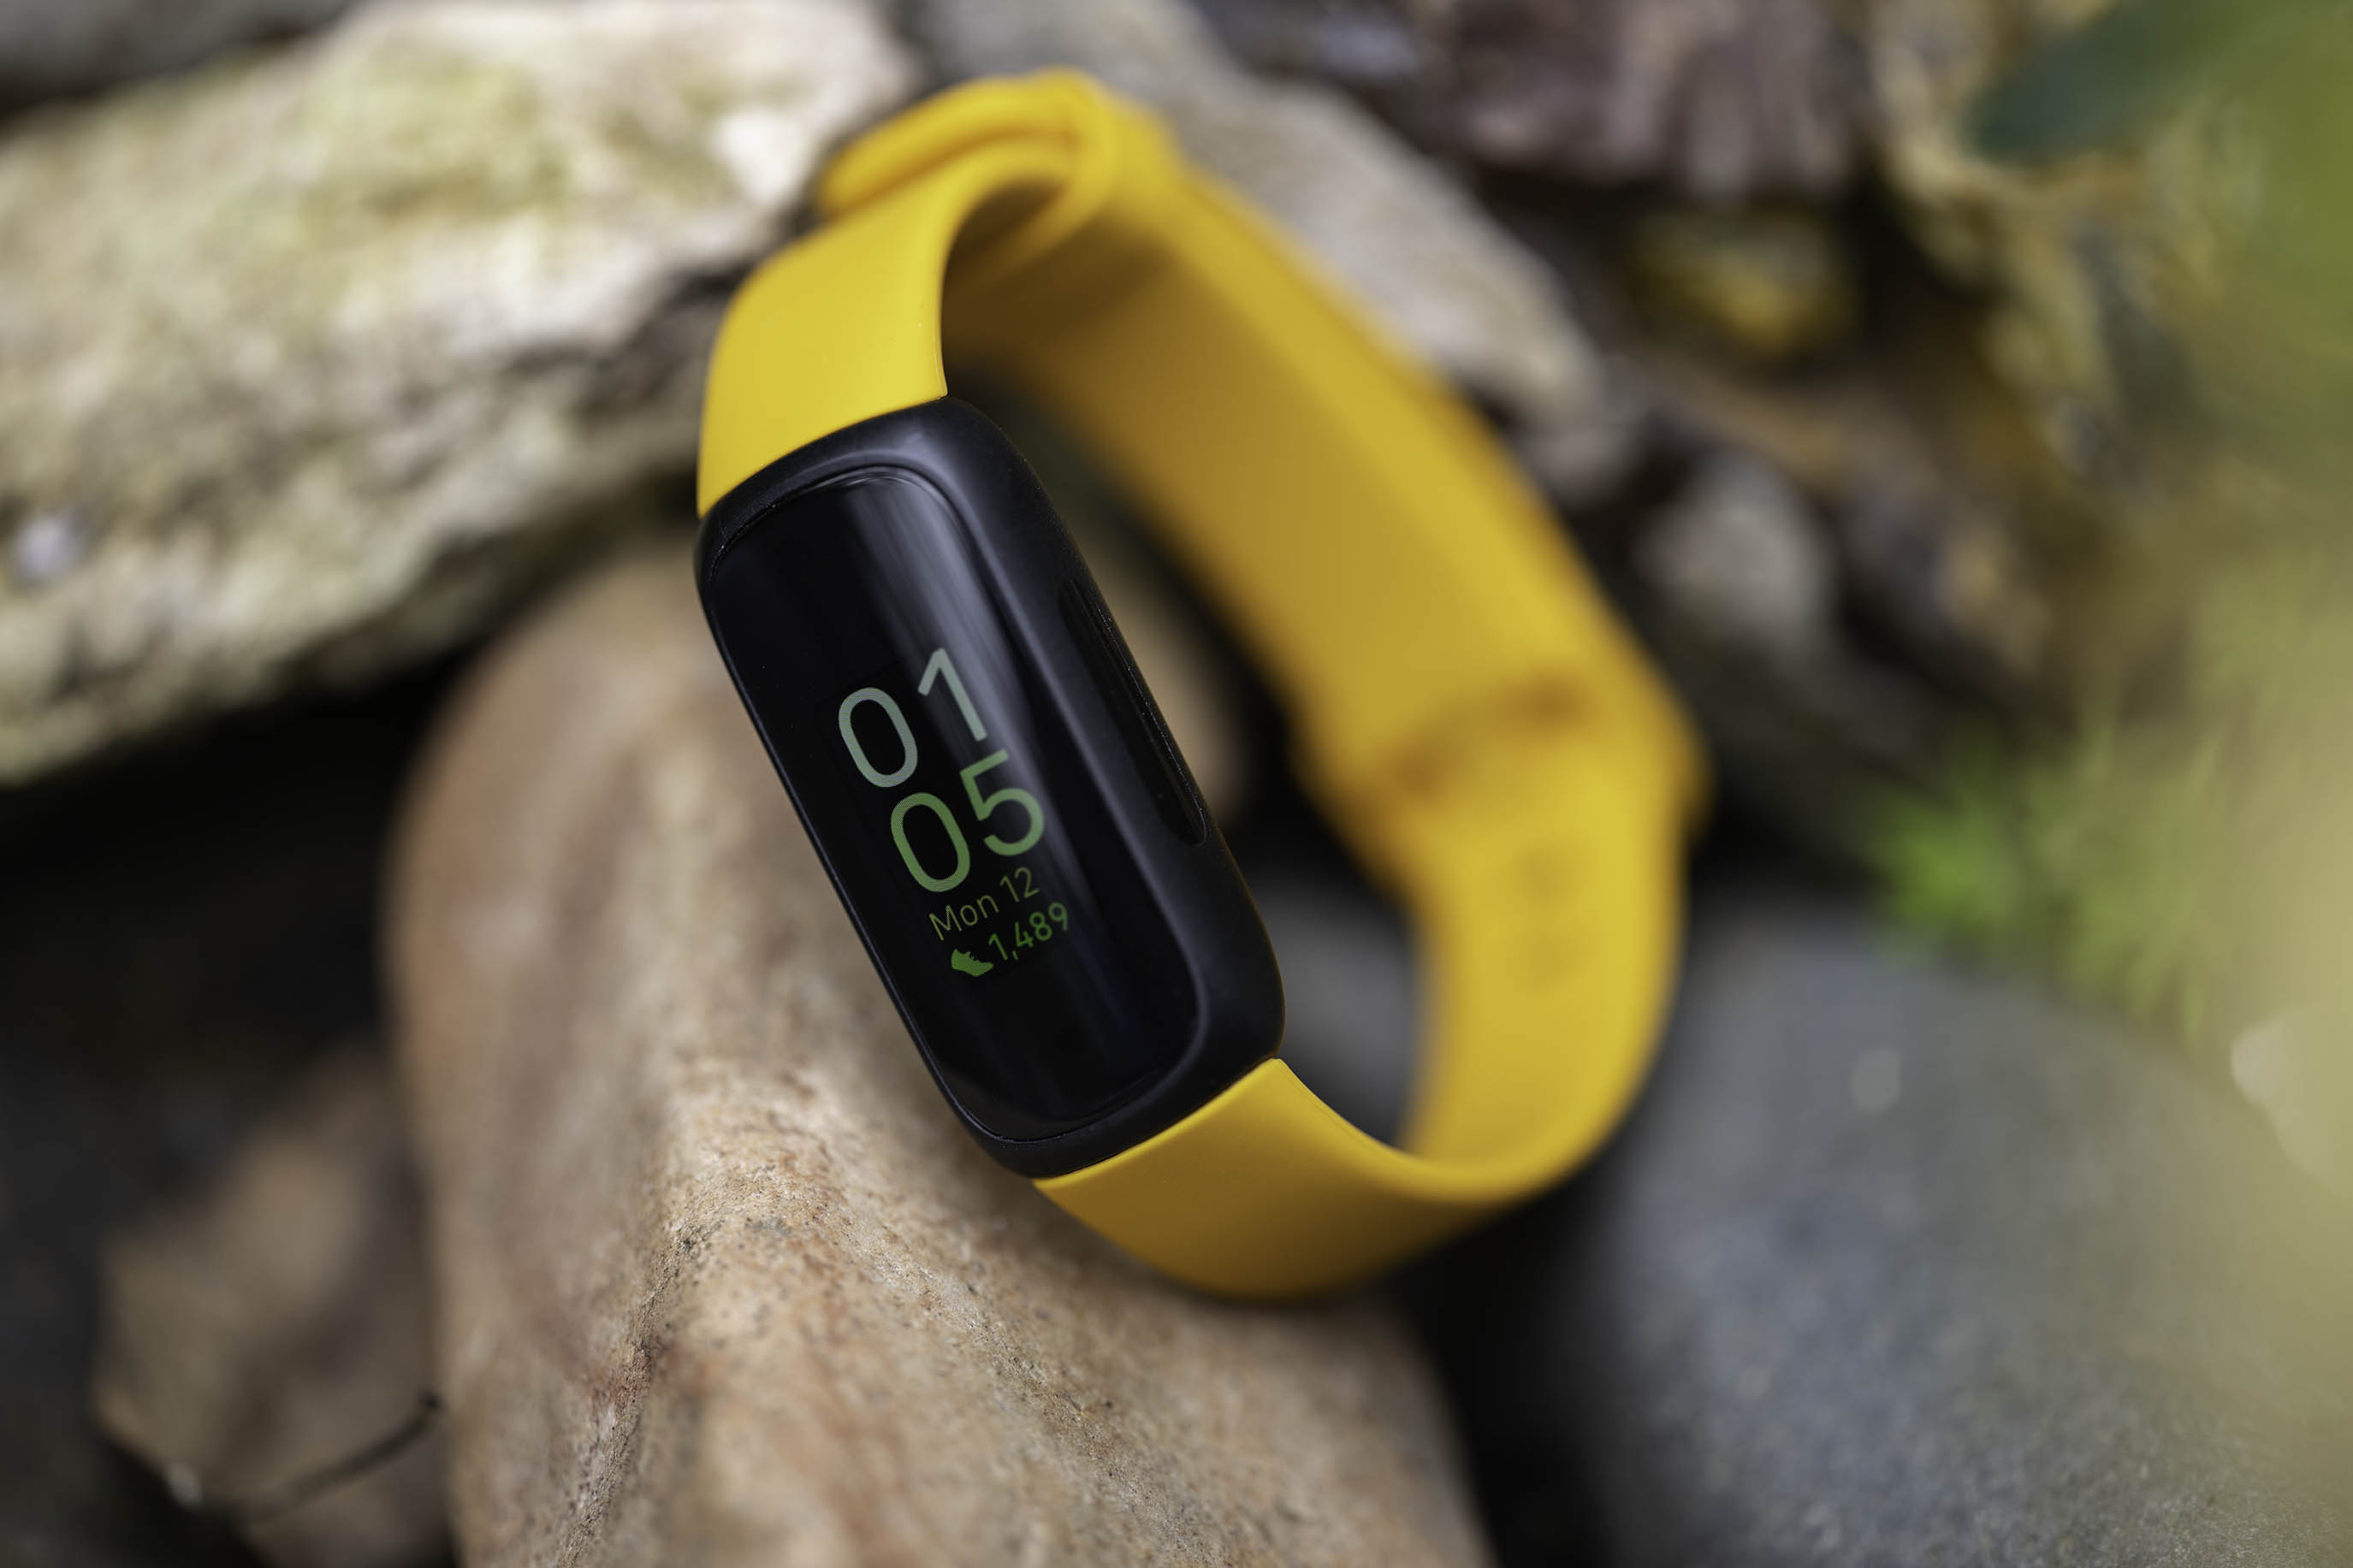 Color Blocks Smart Band Bracelet Watch Connects Bluetooth Active Tracker